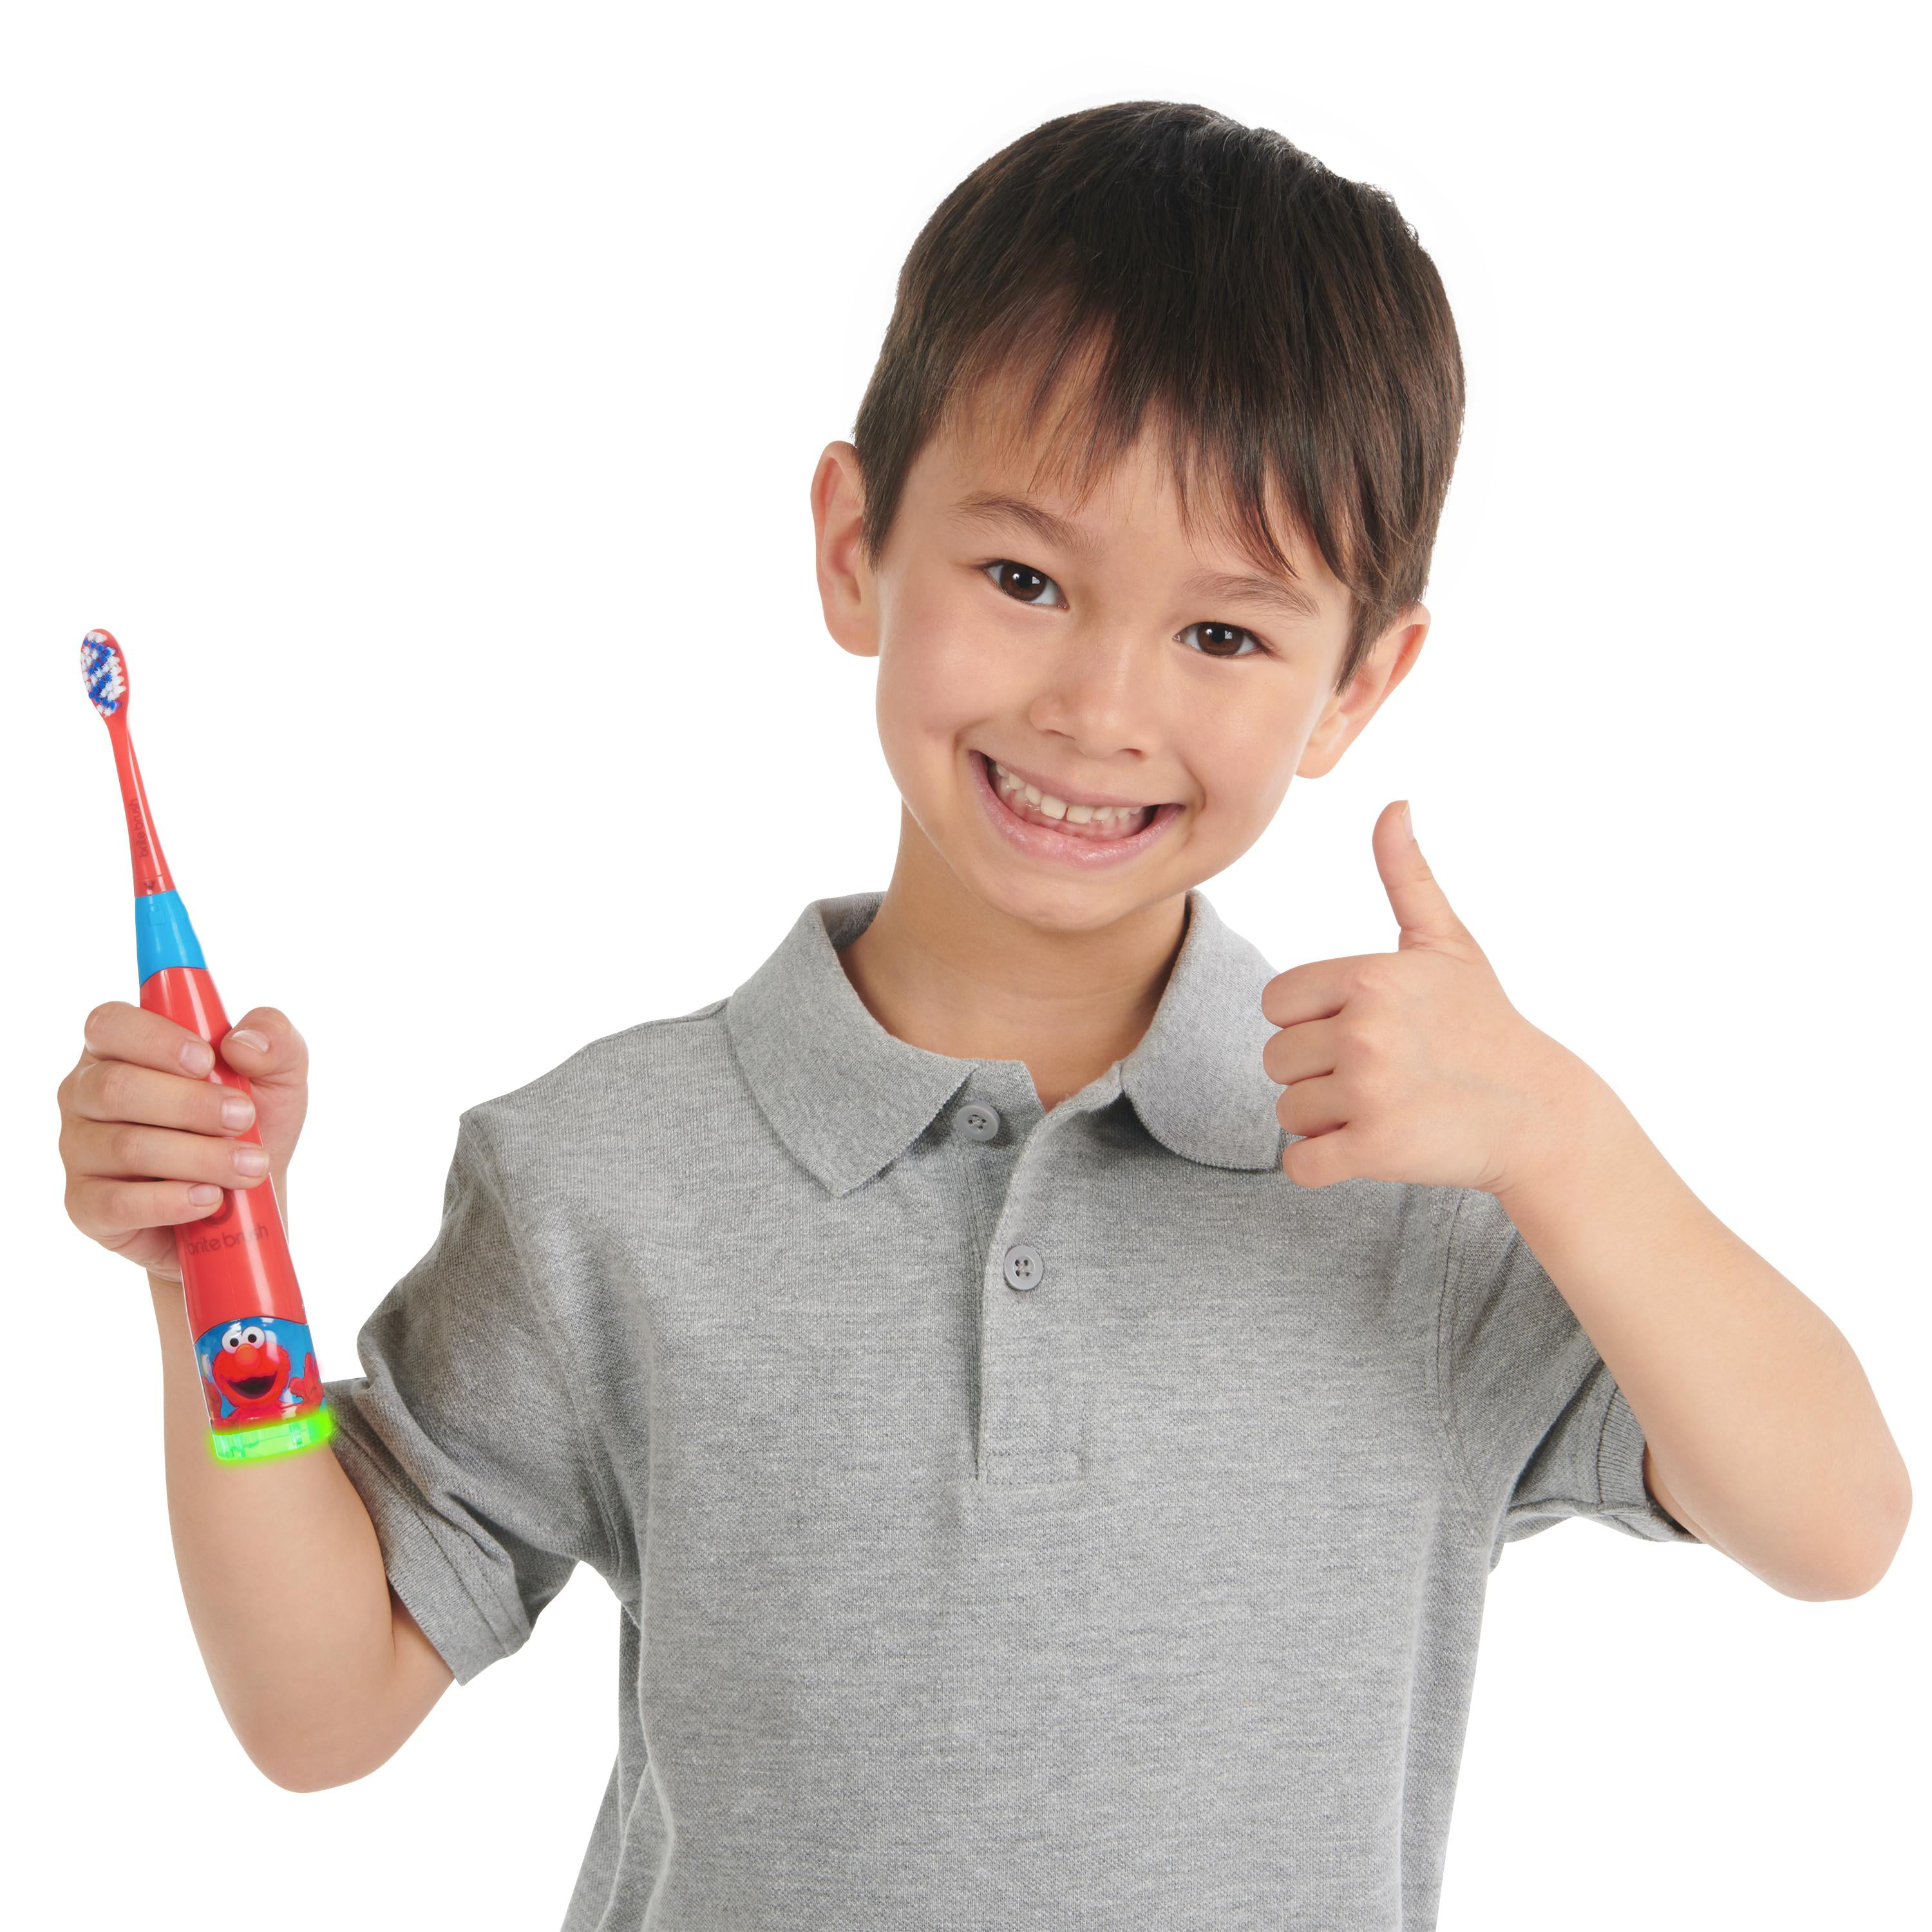 BriteBrush Kids Toothbrush with Elmo - Makes it Fun to Brush Right with  Games and Songs - Walmart.com